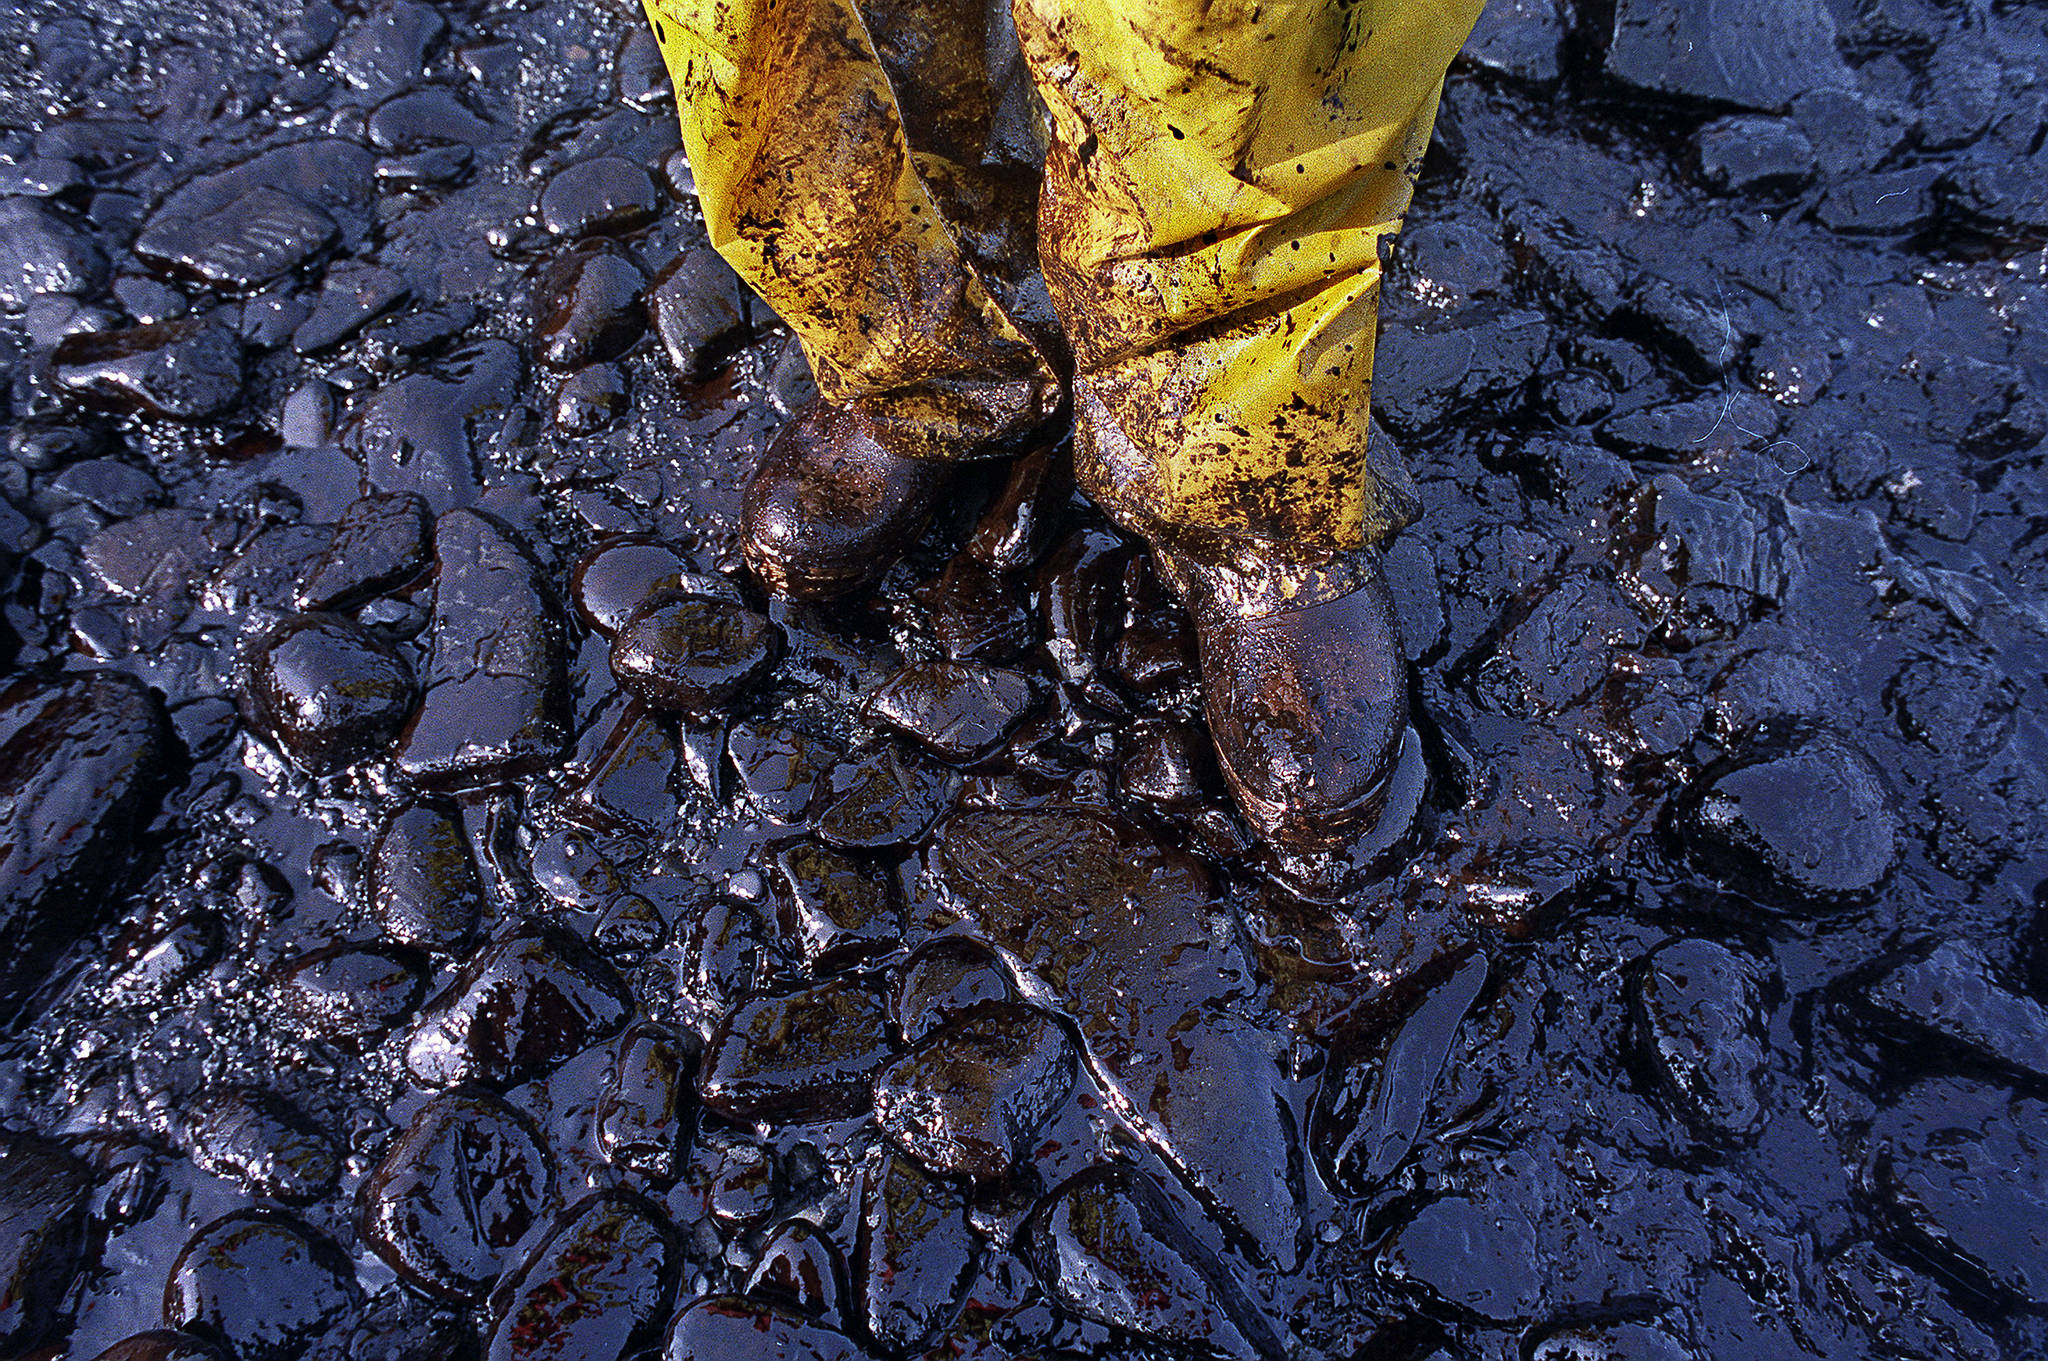 FILE - In this April 1989, file photo, an oil covered bird is examined on an island in Prince William Sound, Alaska, after the Exxon Valdez spill. Thirty years after the supertanker Exxon Valdez hit a reef and spilled about 11 million gallons of oil in Prince William Sound, the state of Alaska is looking whether to change its requirements for oil spill prevention and response plans, a move that one conservationist says could lead to a watering down of environmental regulations. (AP Photo/Jack Smith, File)                                The Exxon Valdez oil tanker spill March 24, 1989, blackened hundreds of miles of coastline in Alaska’s Prince William Sound, devasting wildlife and altering lives in fishing communities for generations. (John Gaps III / Associated Press)